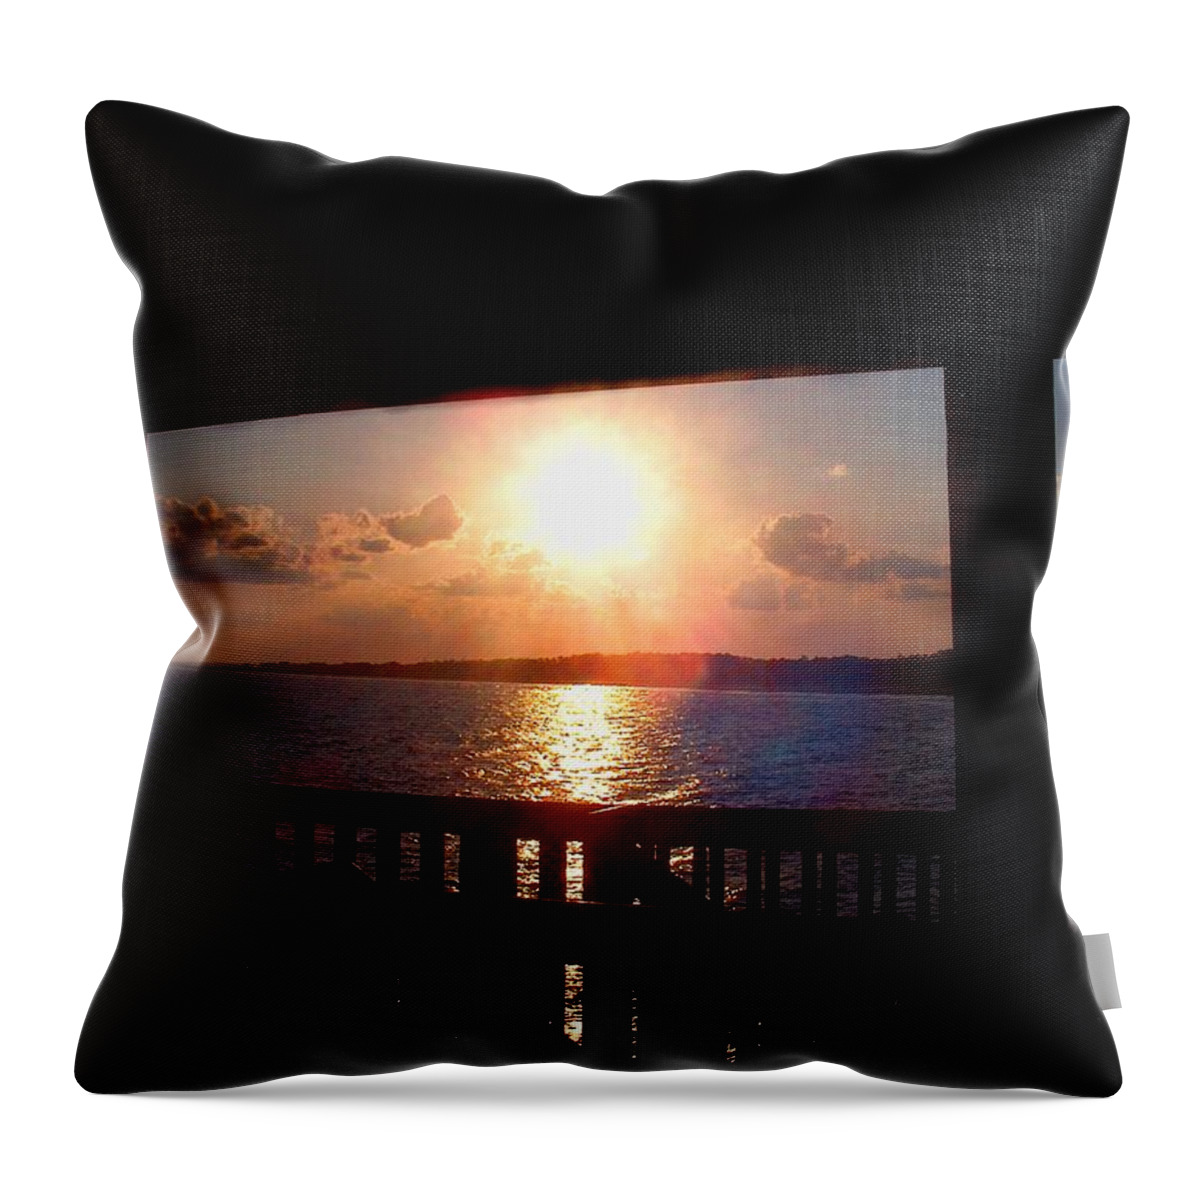 Landscape Throw Pillow featuring the photograph Sunset Folly Pier by Morgan Carter